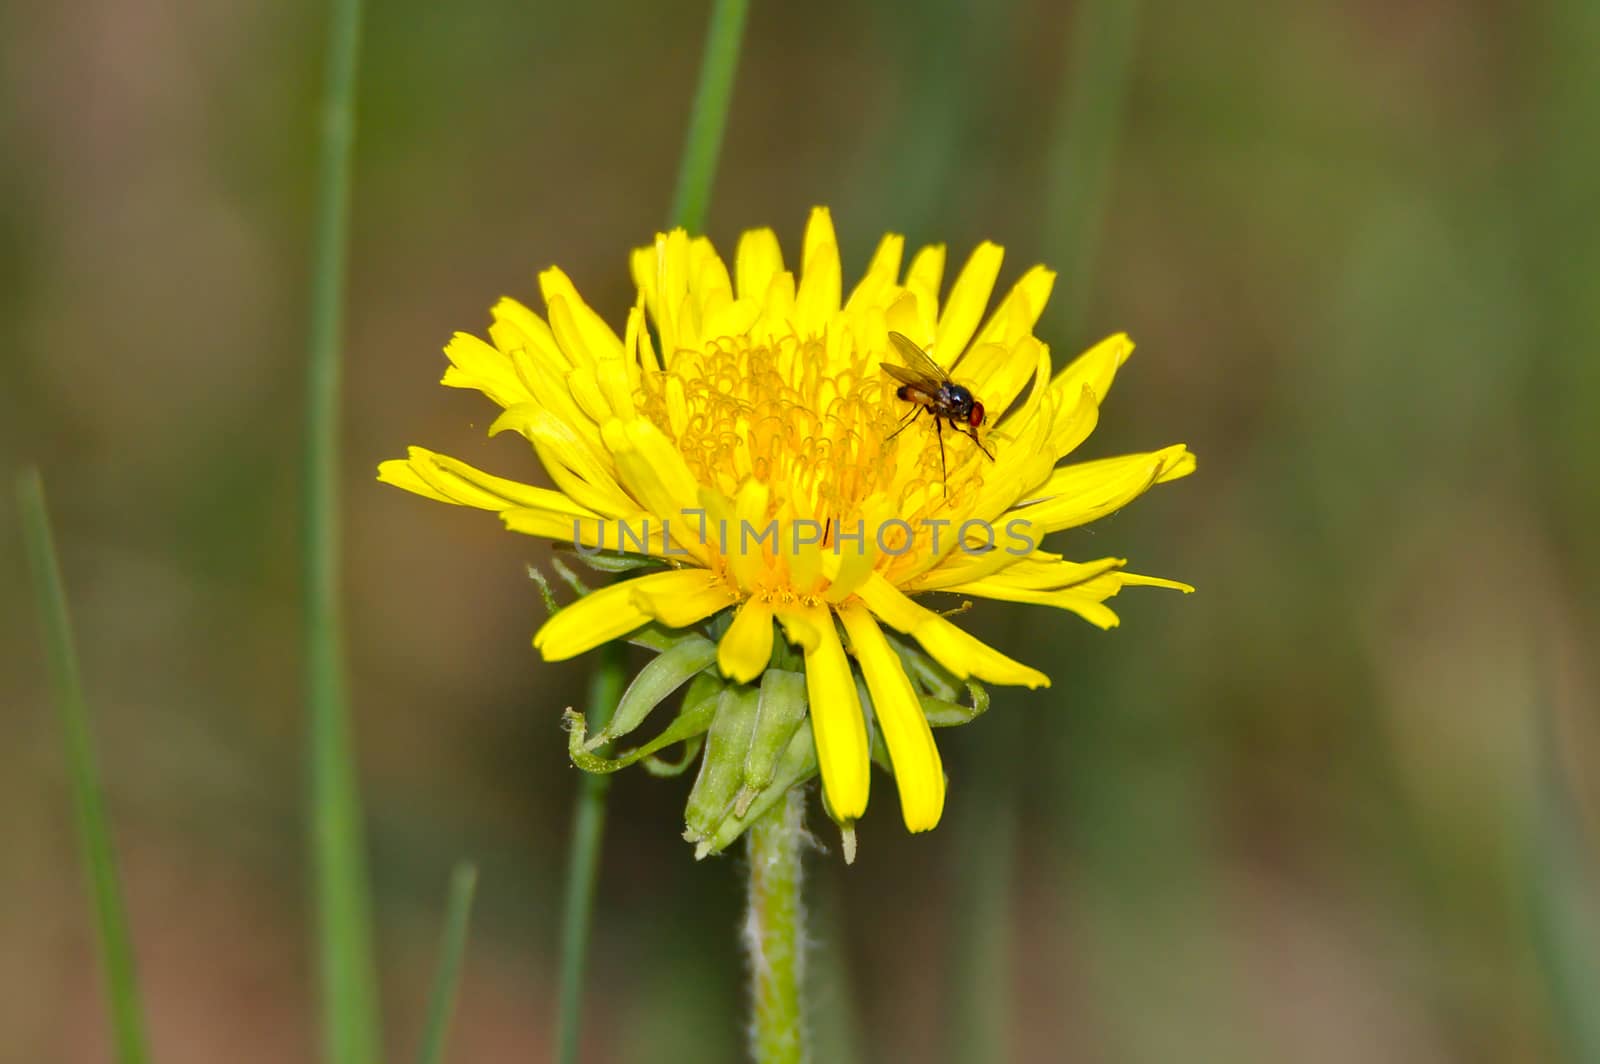 Closeup of a fly on the blooming yellow dandelion. Blurred background